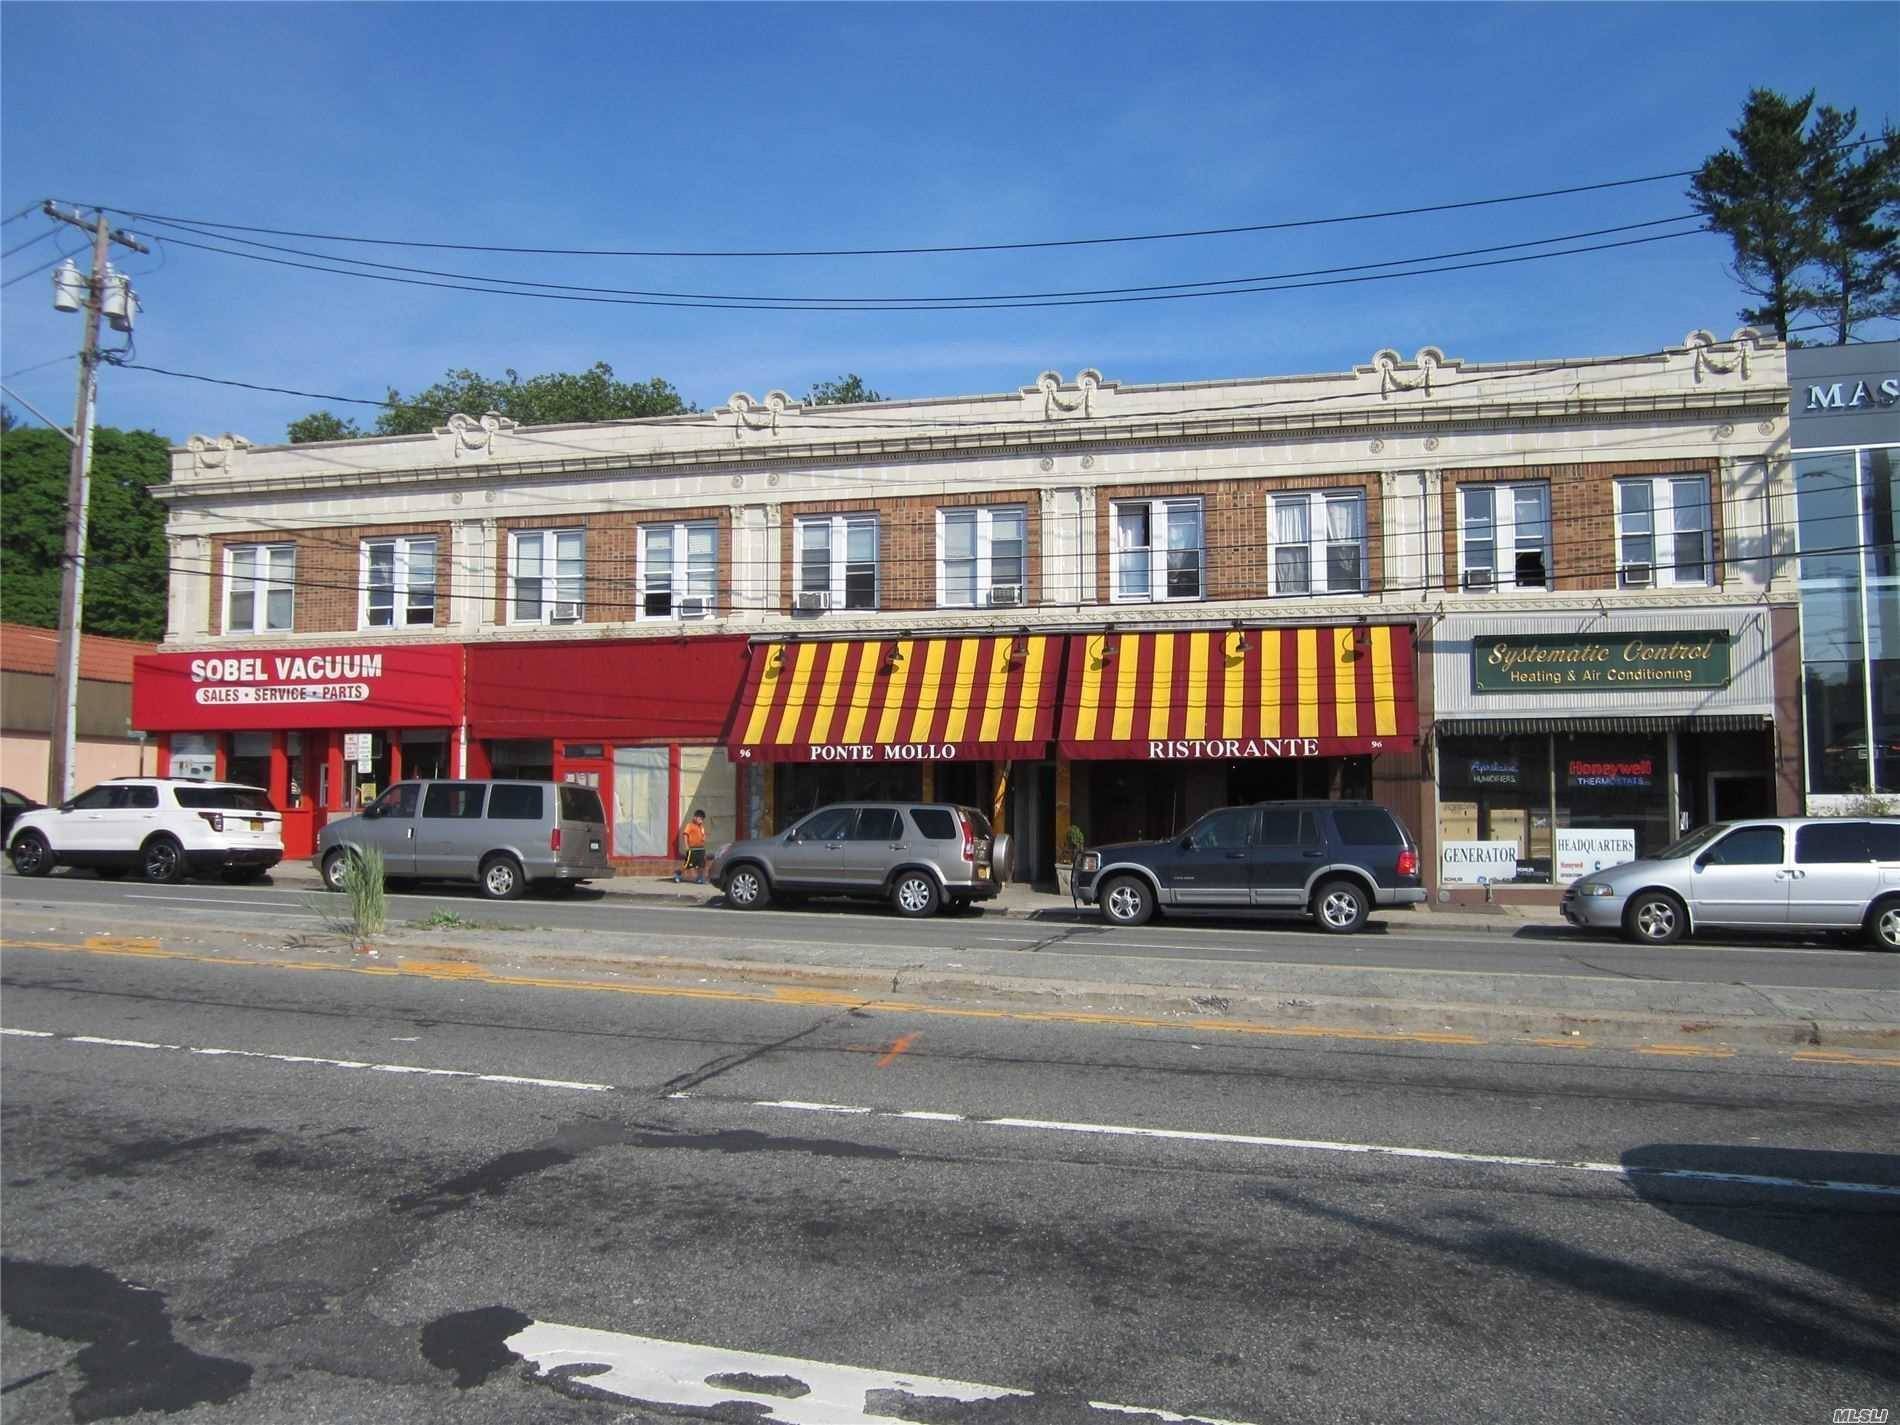 1350 sq ft Storefront for lease at one of the busiest intersections on the North Shore of Long Island on Northern Blvd.